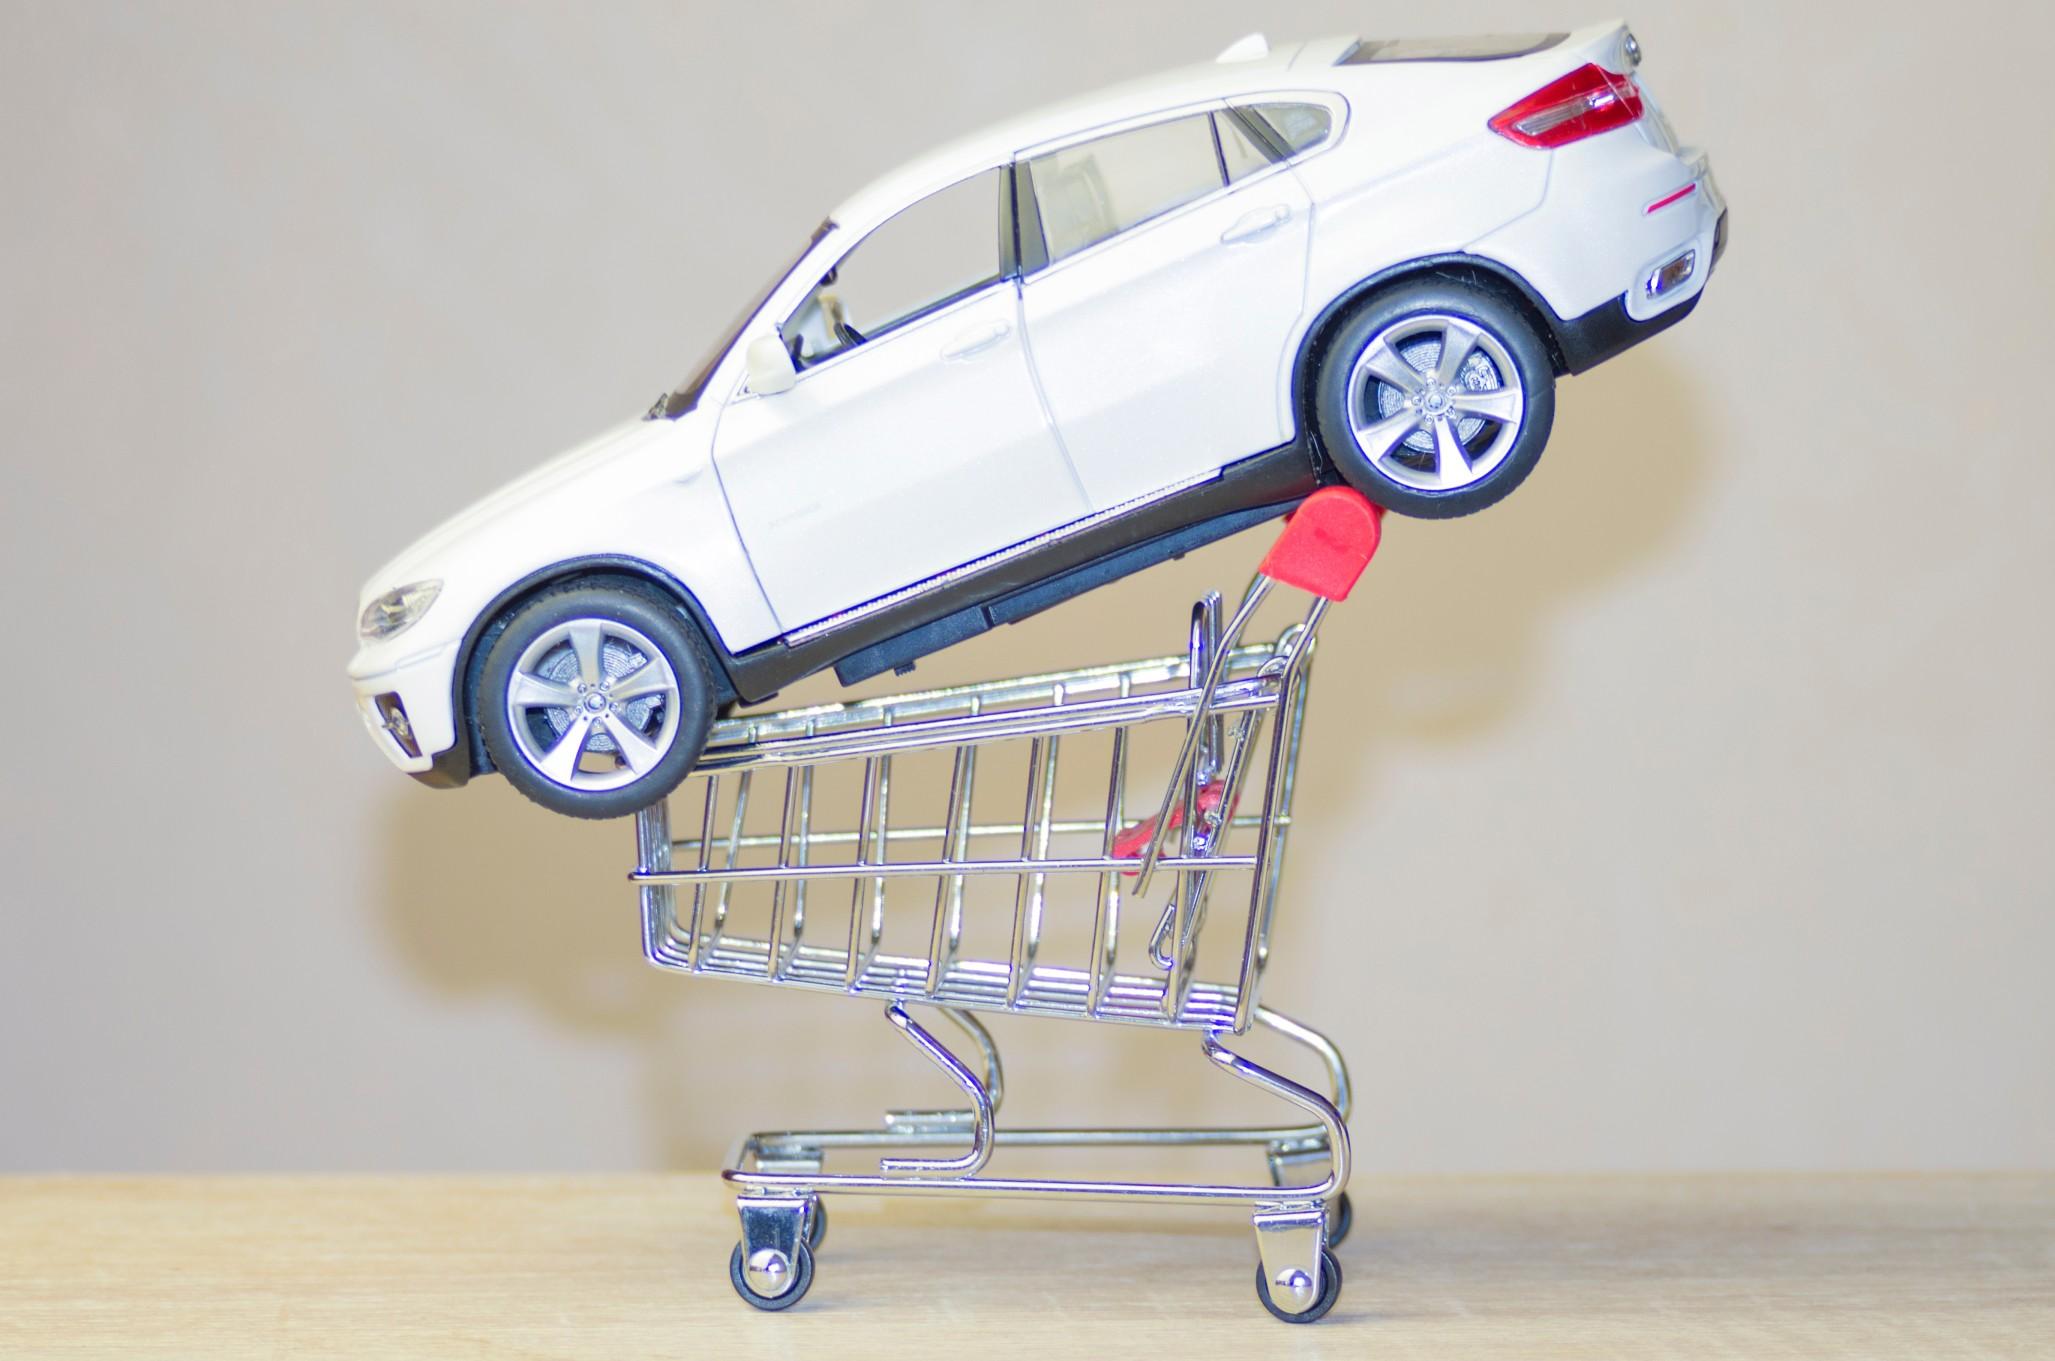 Ford is beginning to provide better online shopping options to customers.